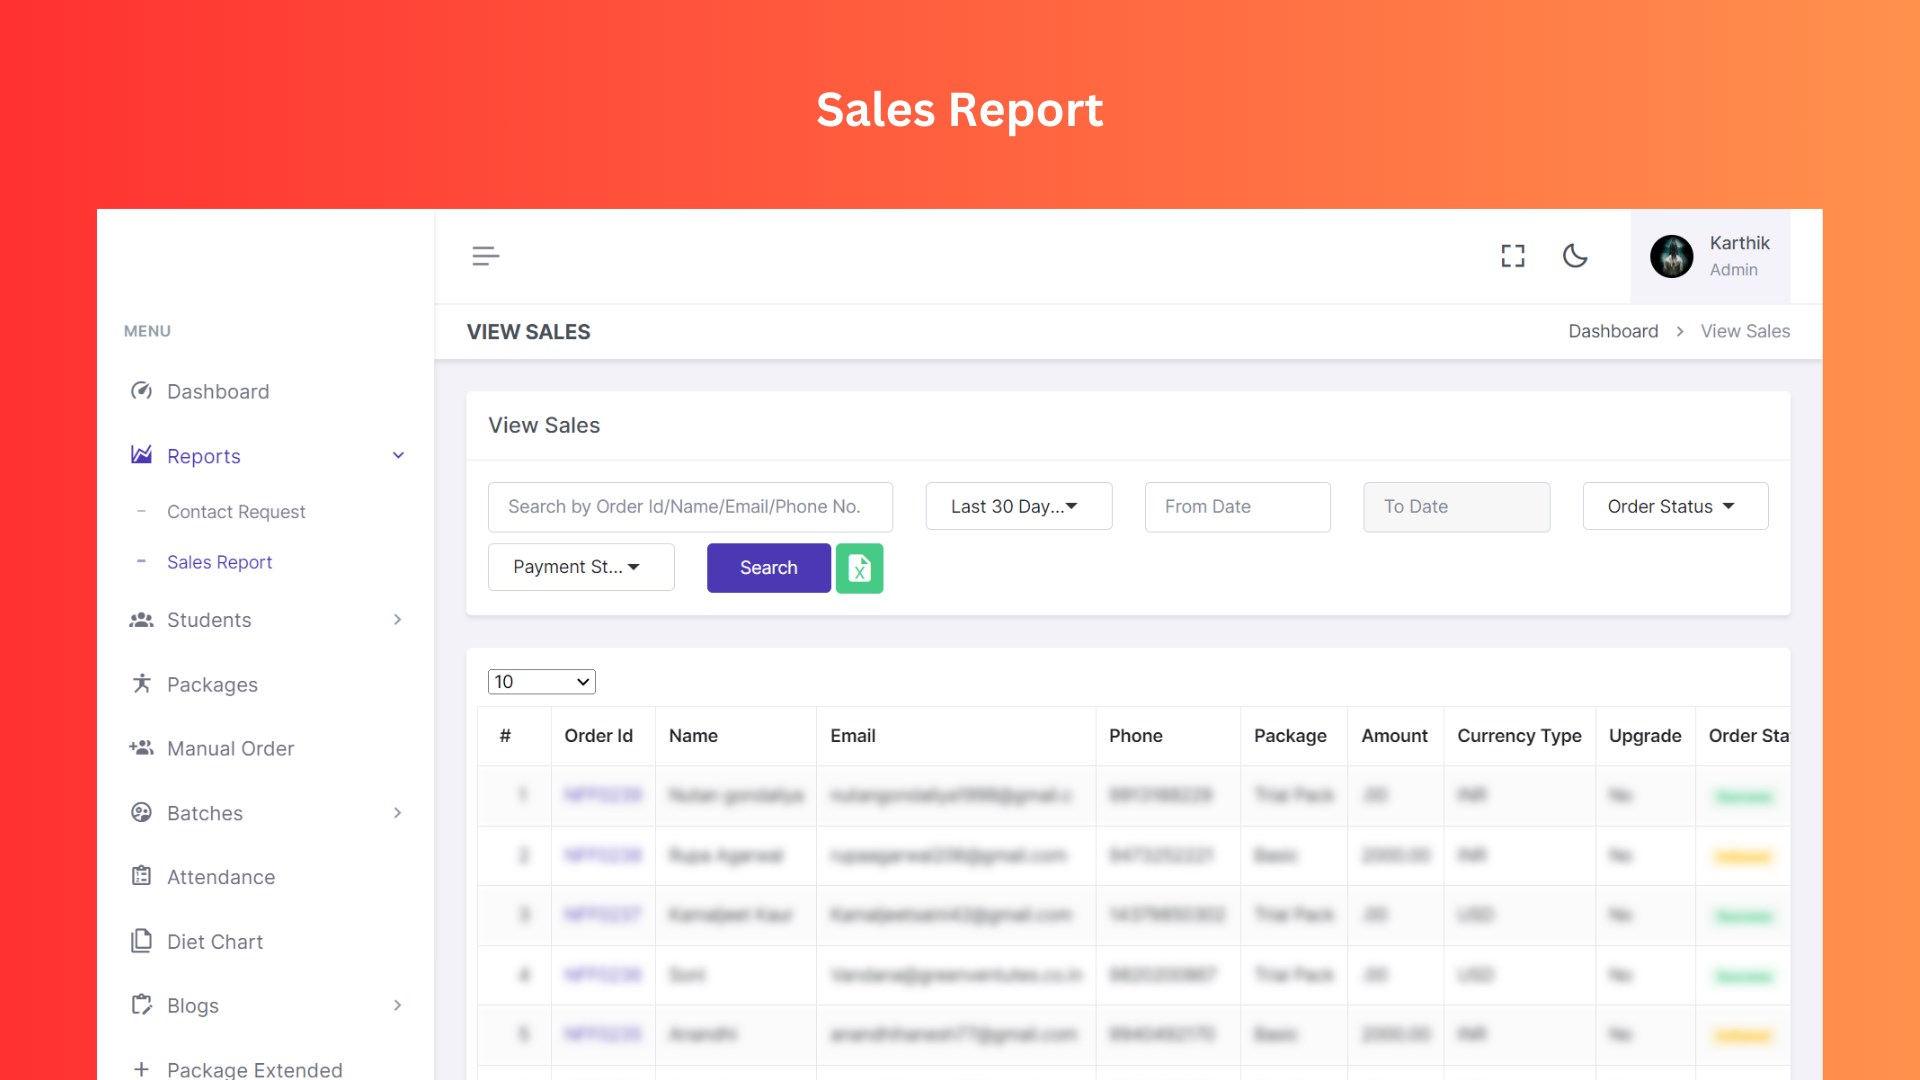 Feature to display all consolidated sales reports in a centralized location, with customizable filters such as date, order status, payment status, order ID, and user details.